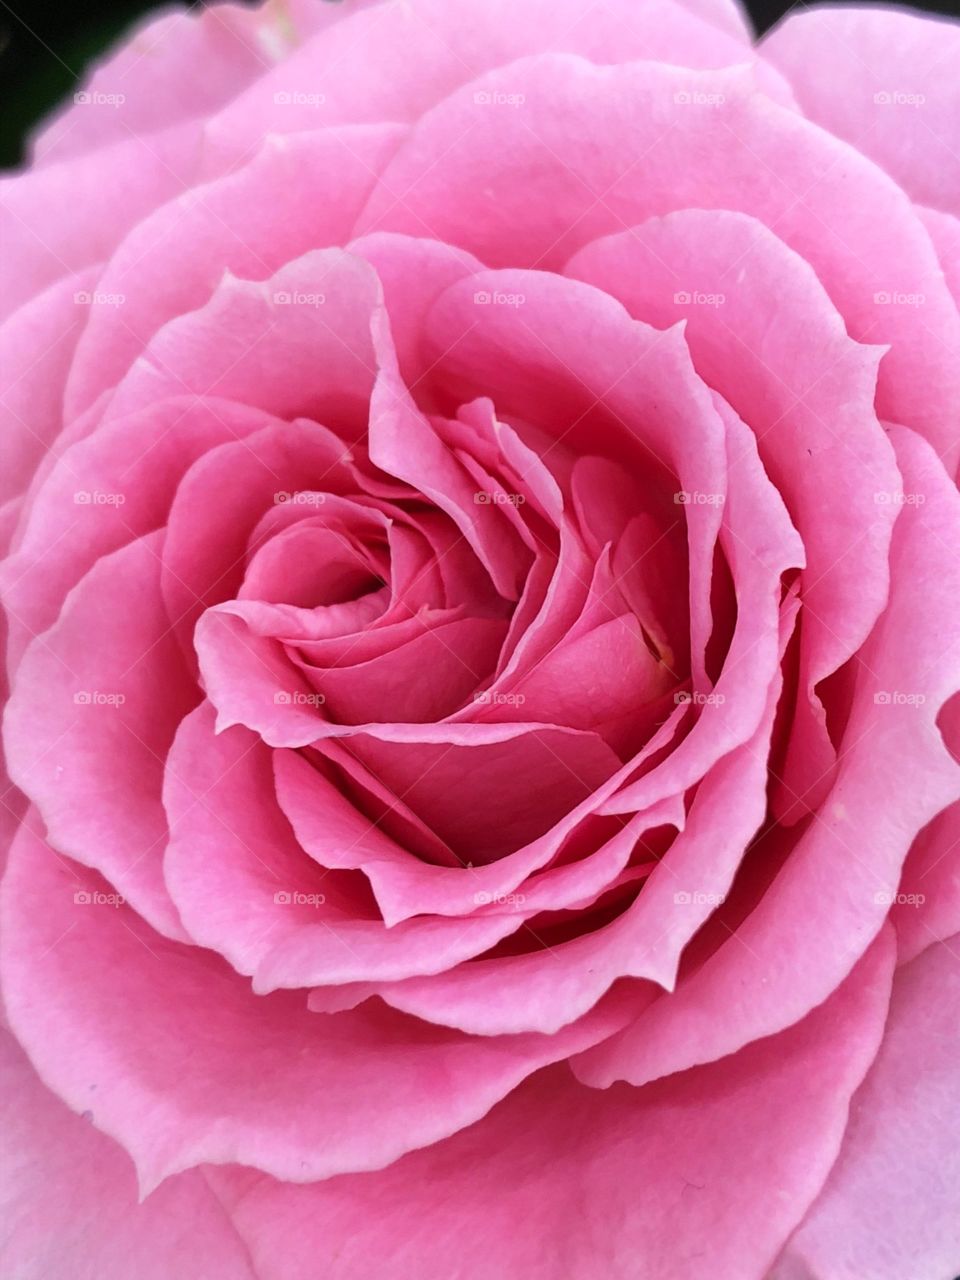 Macro image of the head of a fresh pink rose fully bloomed